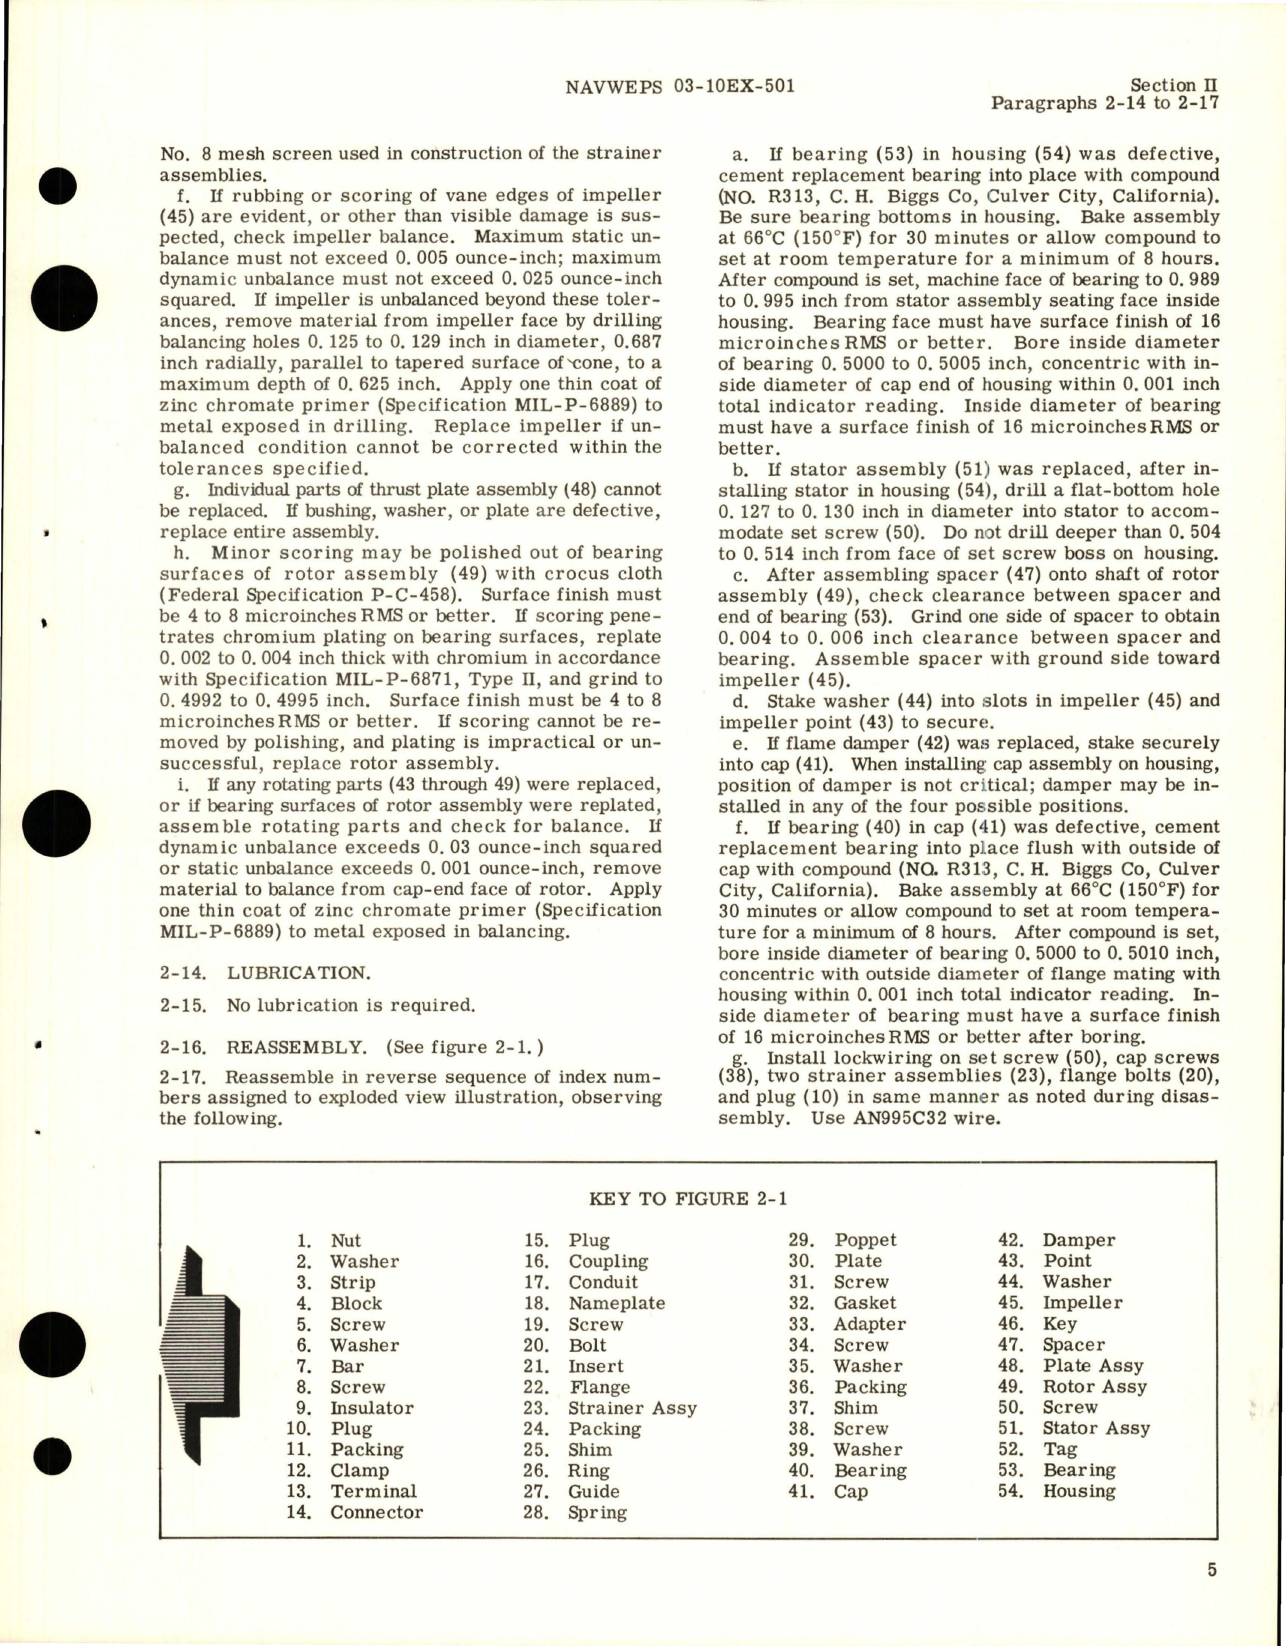 Sample page 7 from AirCorps Library document: Overhaul Instructions for Fuel Booster Pump